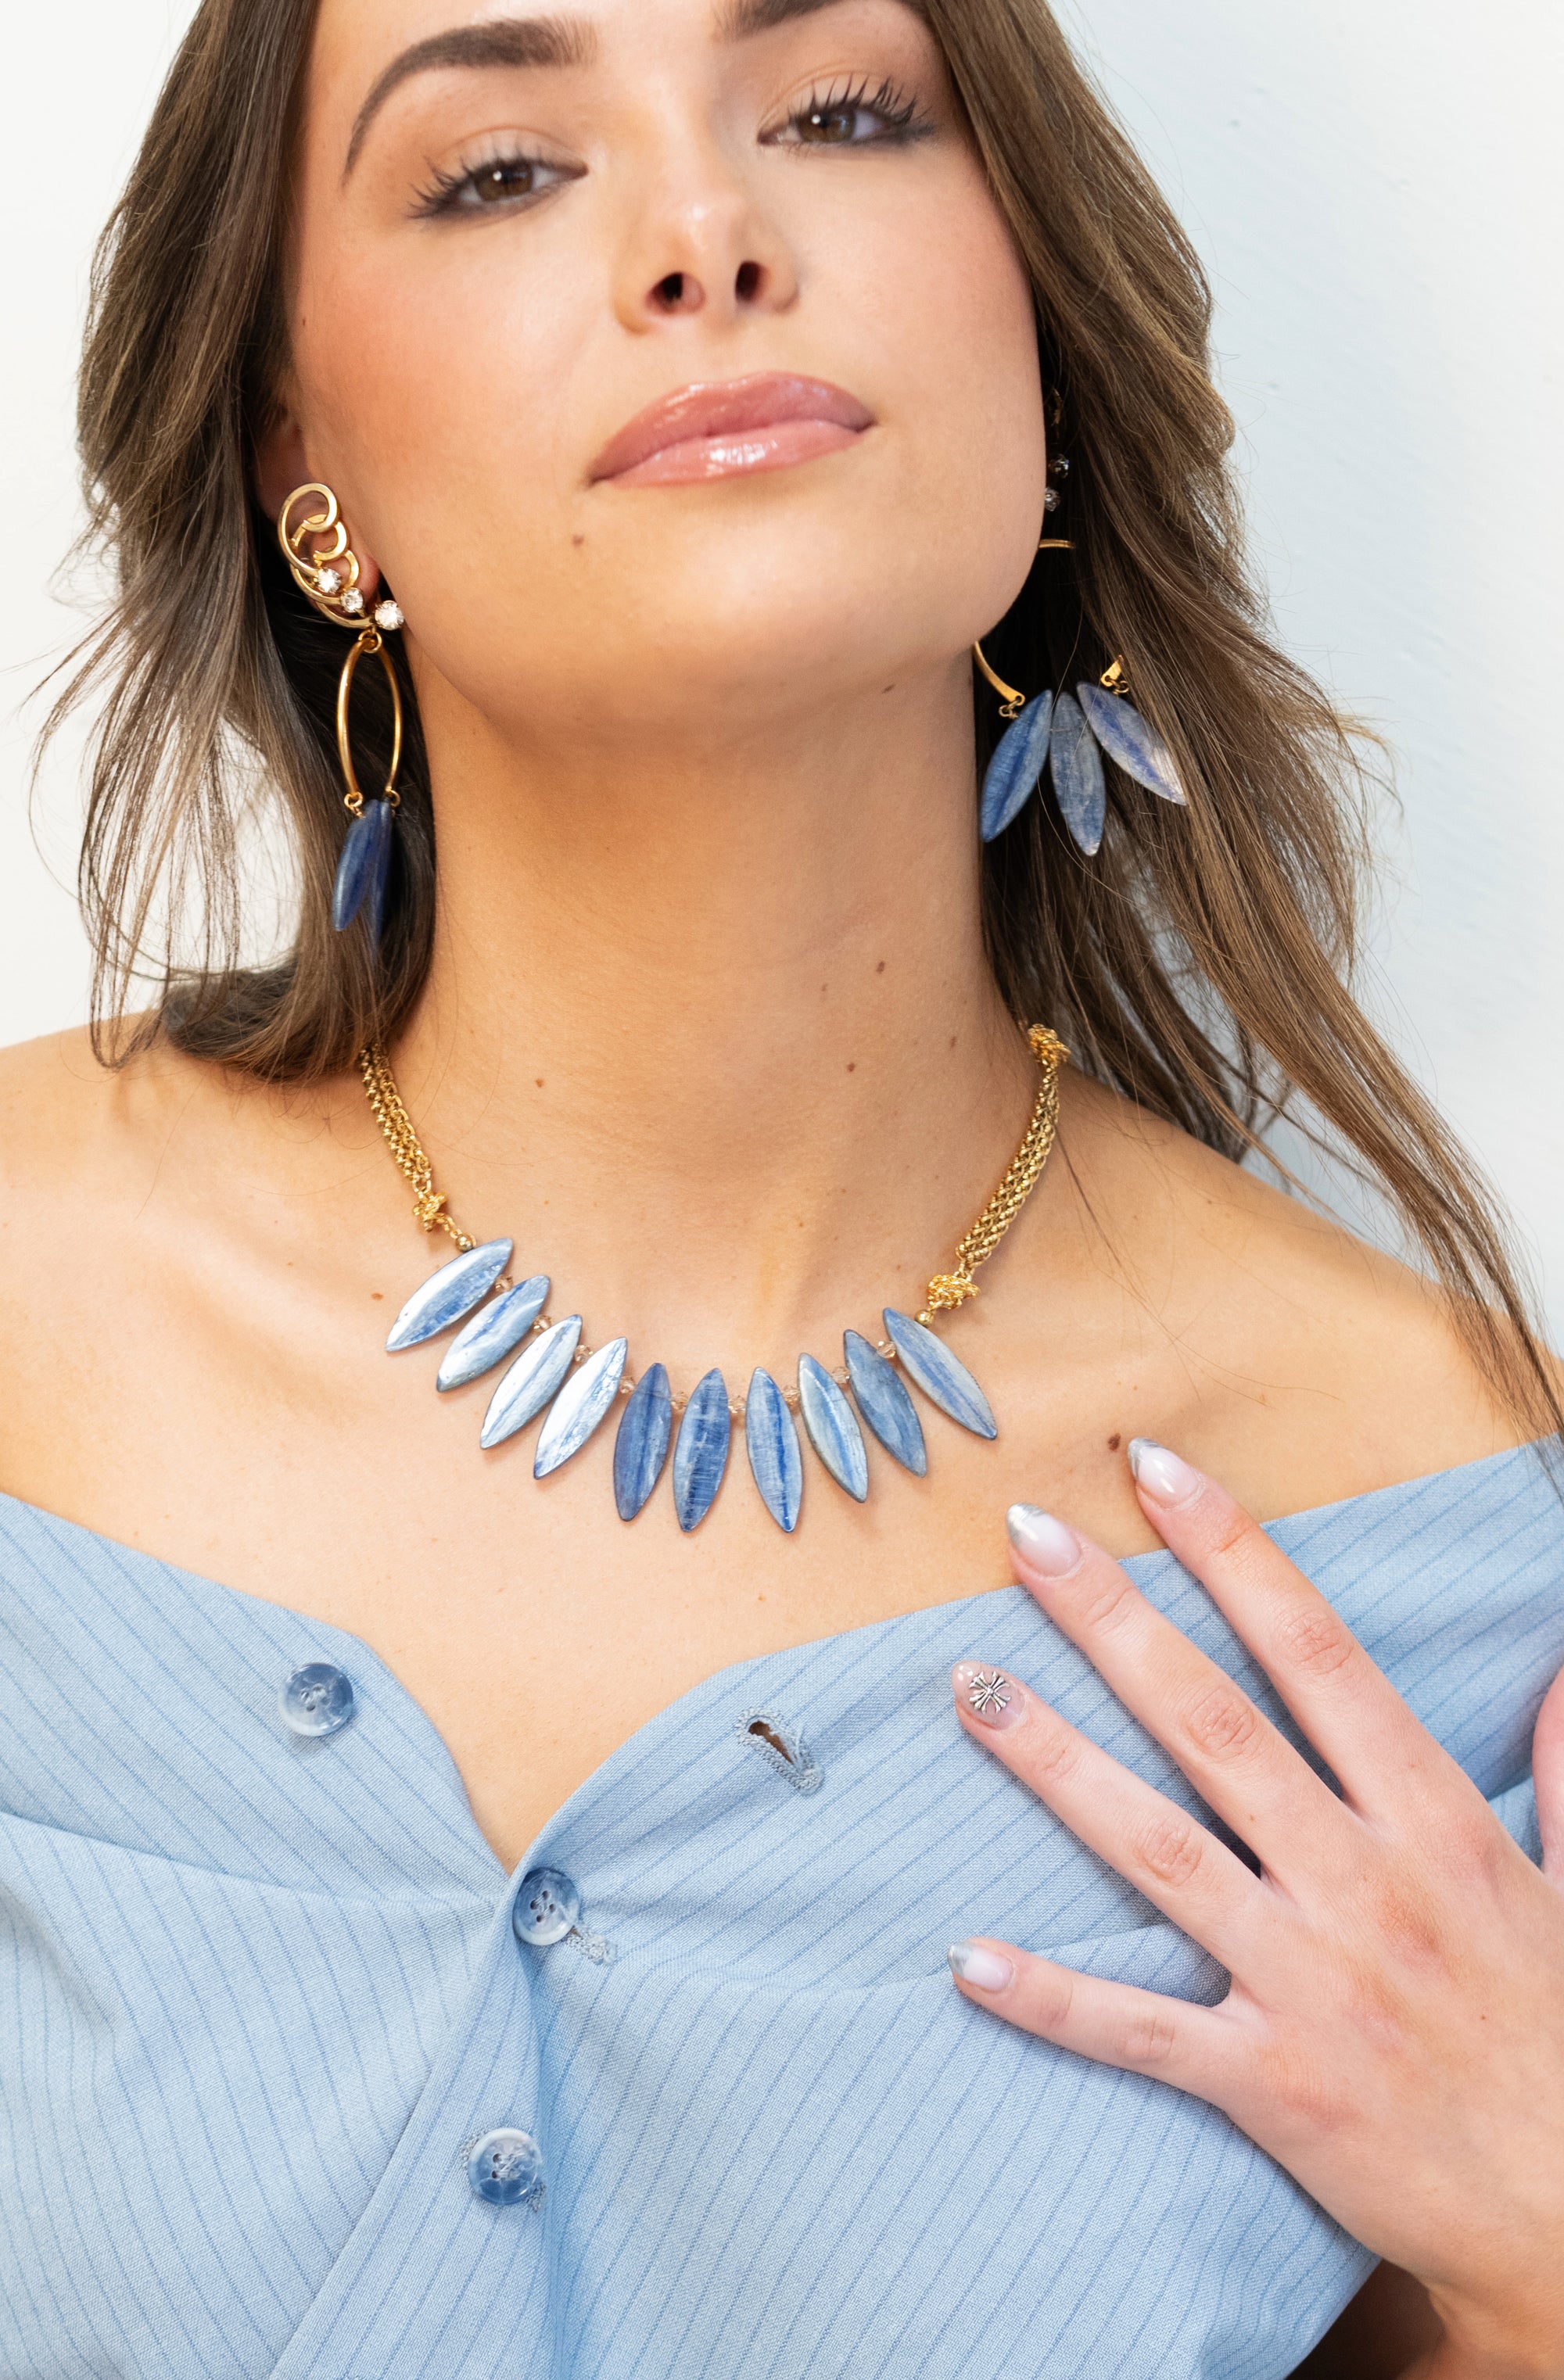 Blue kyanite necklace and earrings by Jenny Dayco 2